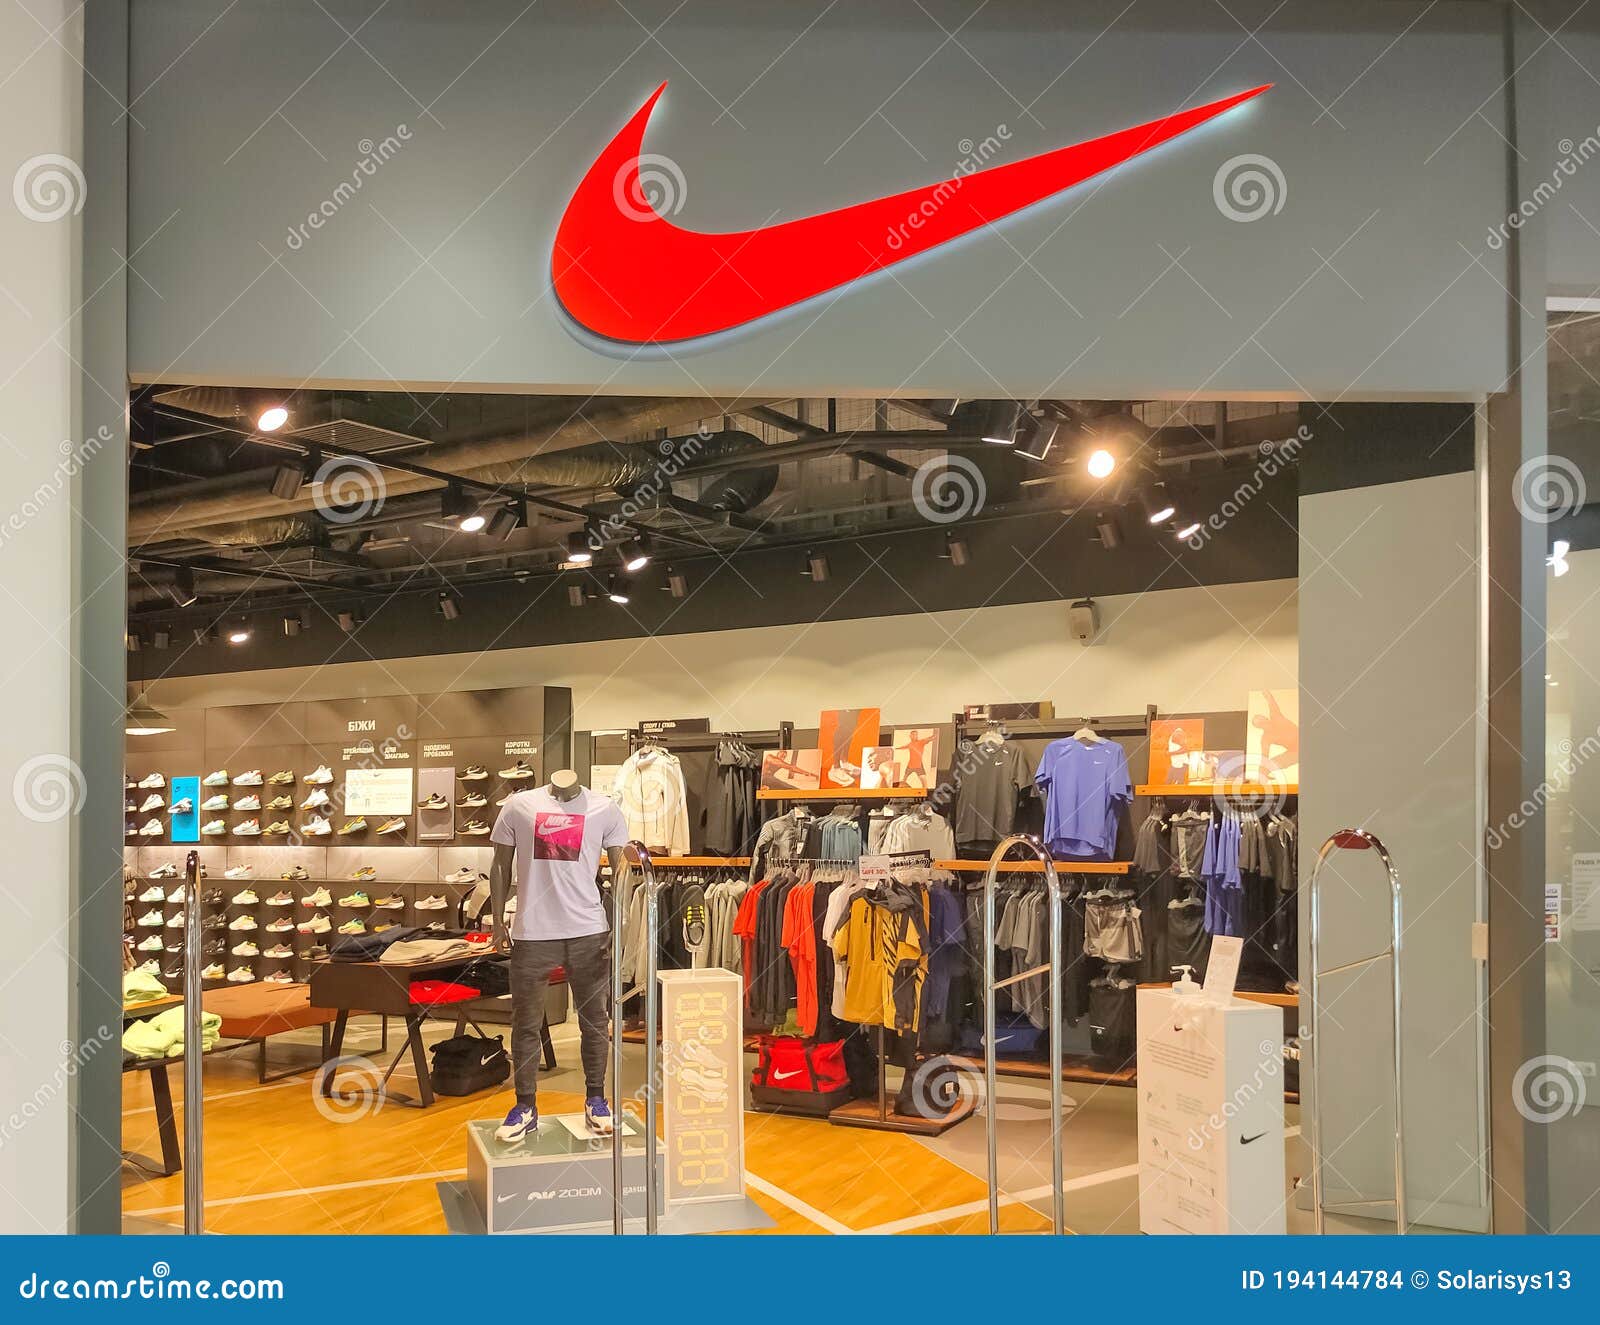 where is the biggest nike store